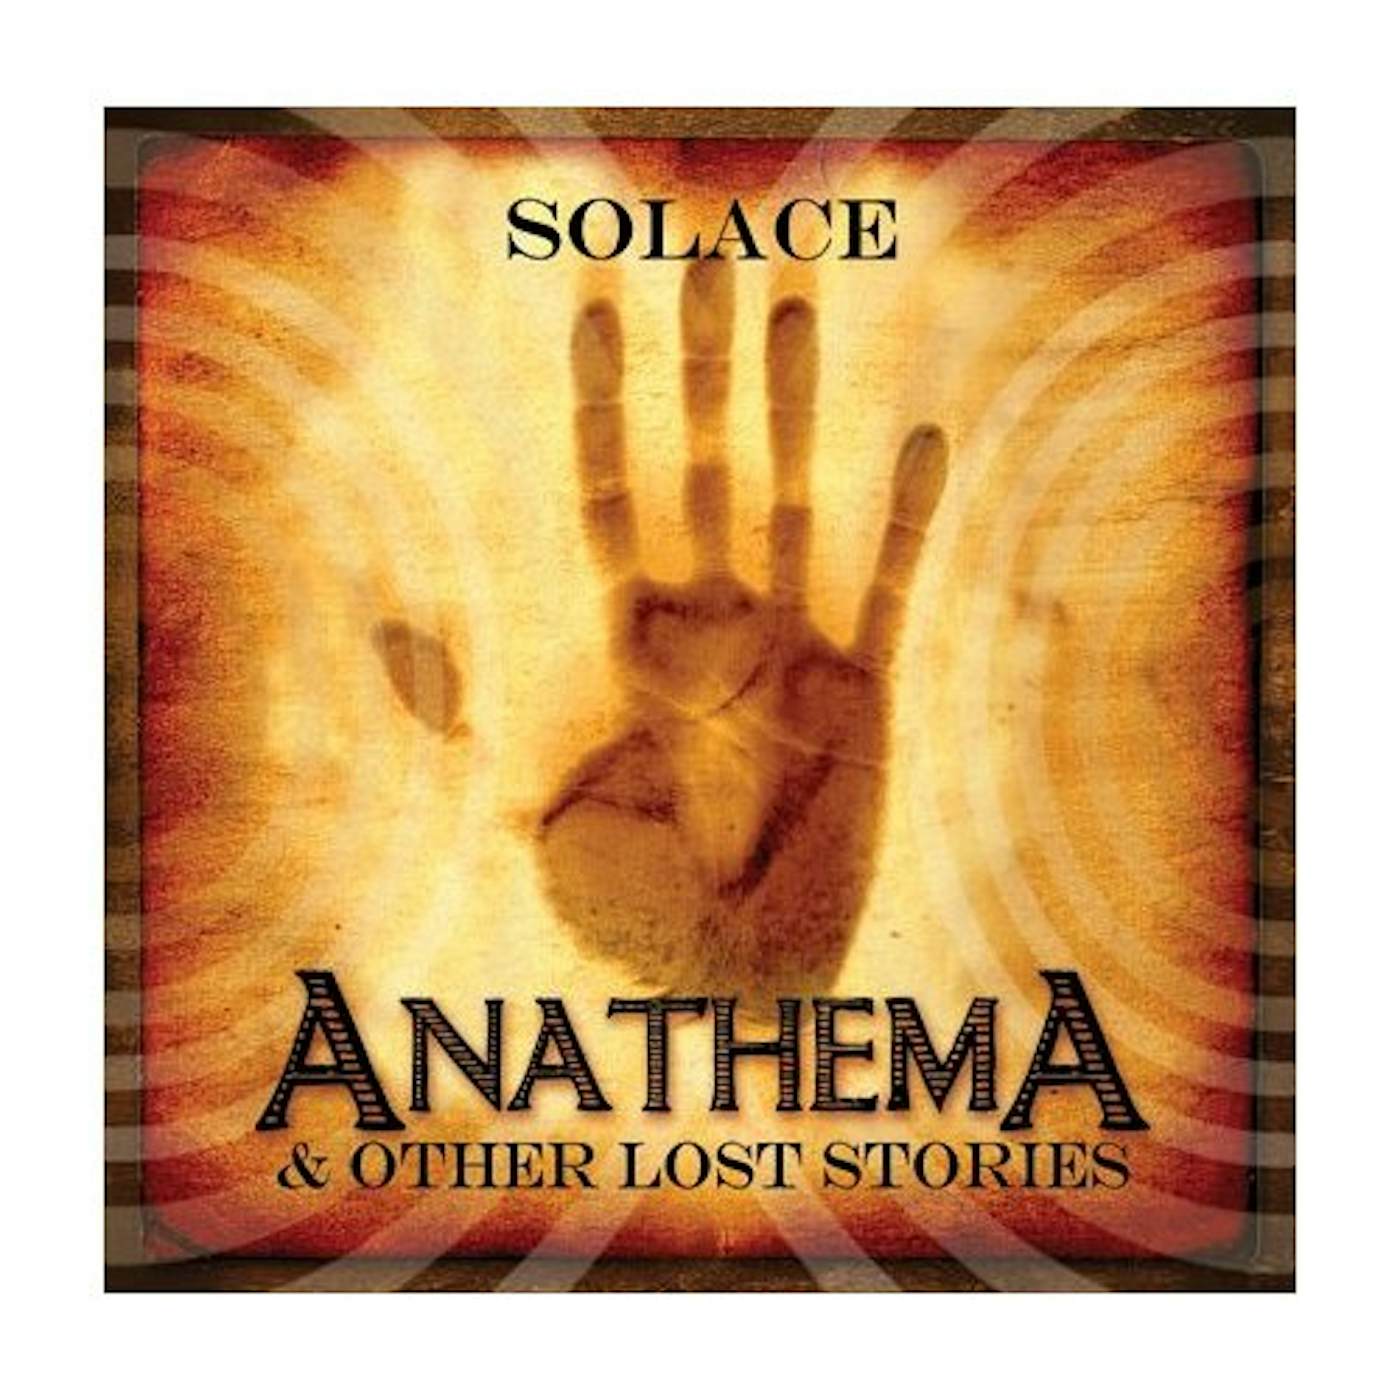 Solace ANATHEMA & OTHER LOST STORIES CD